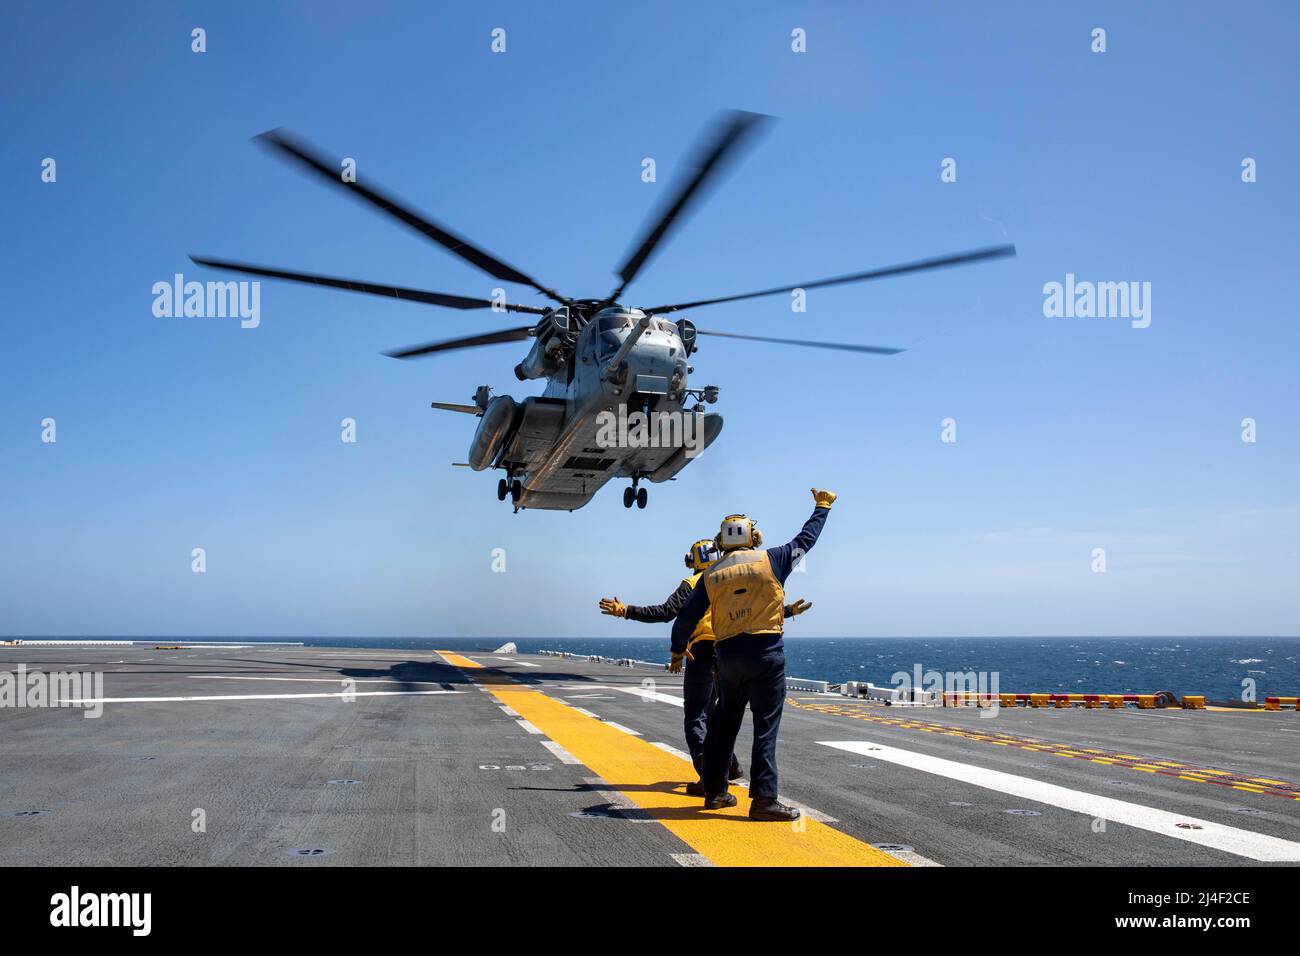 220413-N-NY430-2098    PACIFIC OCEAN (April 13, 2022) – Aviation Boatswain’s Mate (Handling) 3rd Class Jonathan Walker, right, and Airman Kory Vogel direct a CH-53E Super Stallion, assigned to Marine Heavy Helicopter Squadron (HMH) 462, as it takes-off from the flight deck of Amphibious Assault Ship USS Makin Island (LHD 8), April 13. Aviation Boatswain’s Mates direct the movement and spotting of aircraft ashore and afloat. Makin Island is underway conducting routine operations in U.S. 3rd Fleet. (U.S. Navy photo by Mass Communication Specialist 2nd Class Kristopher S. Haley) Stock Photo